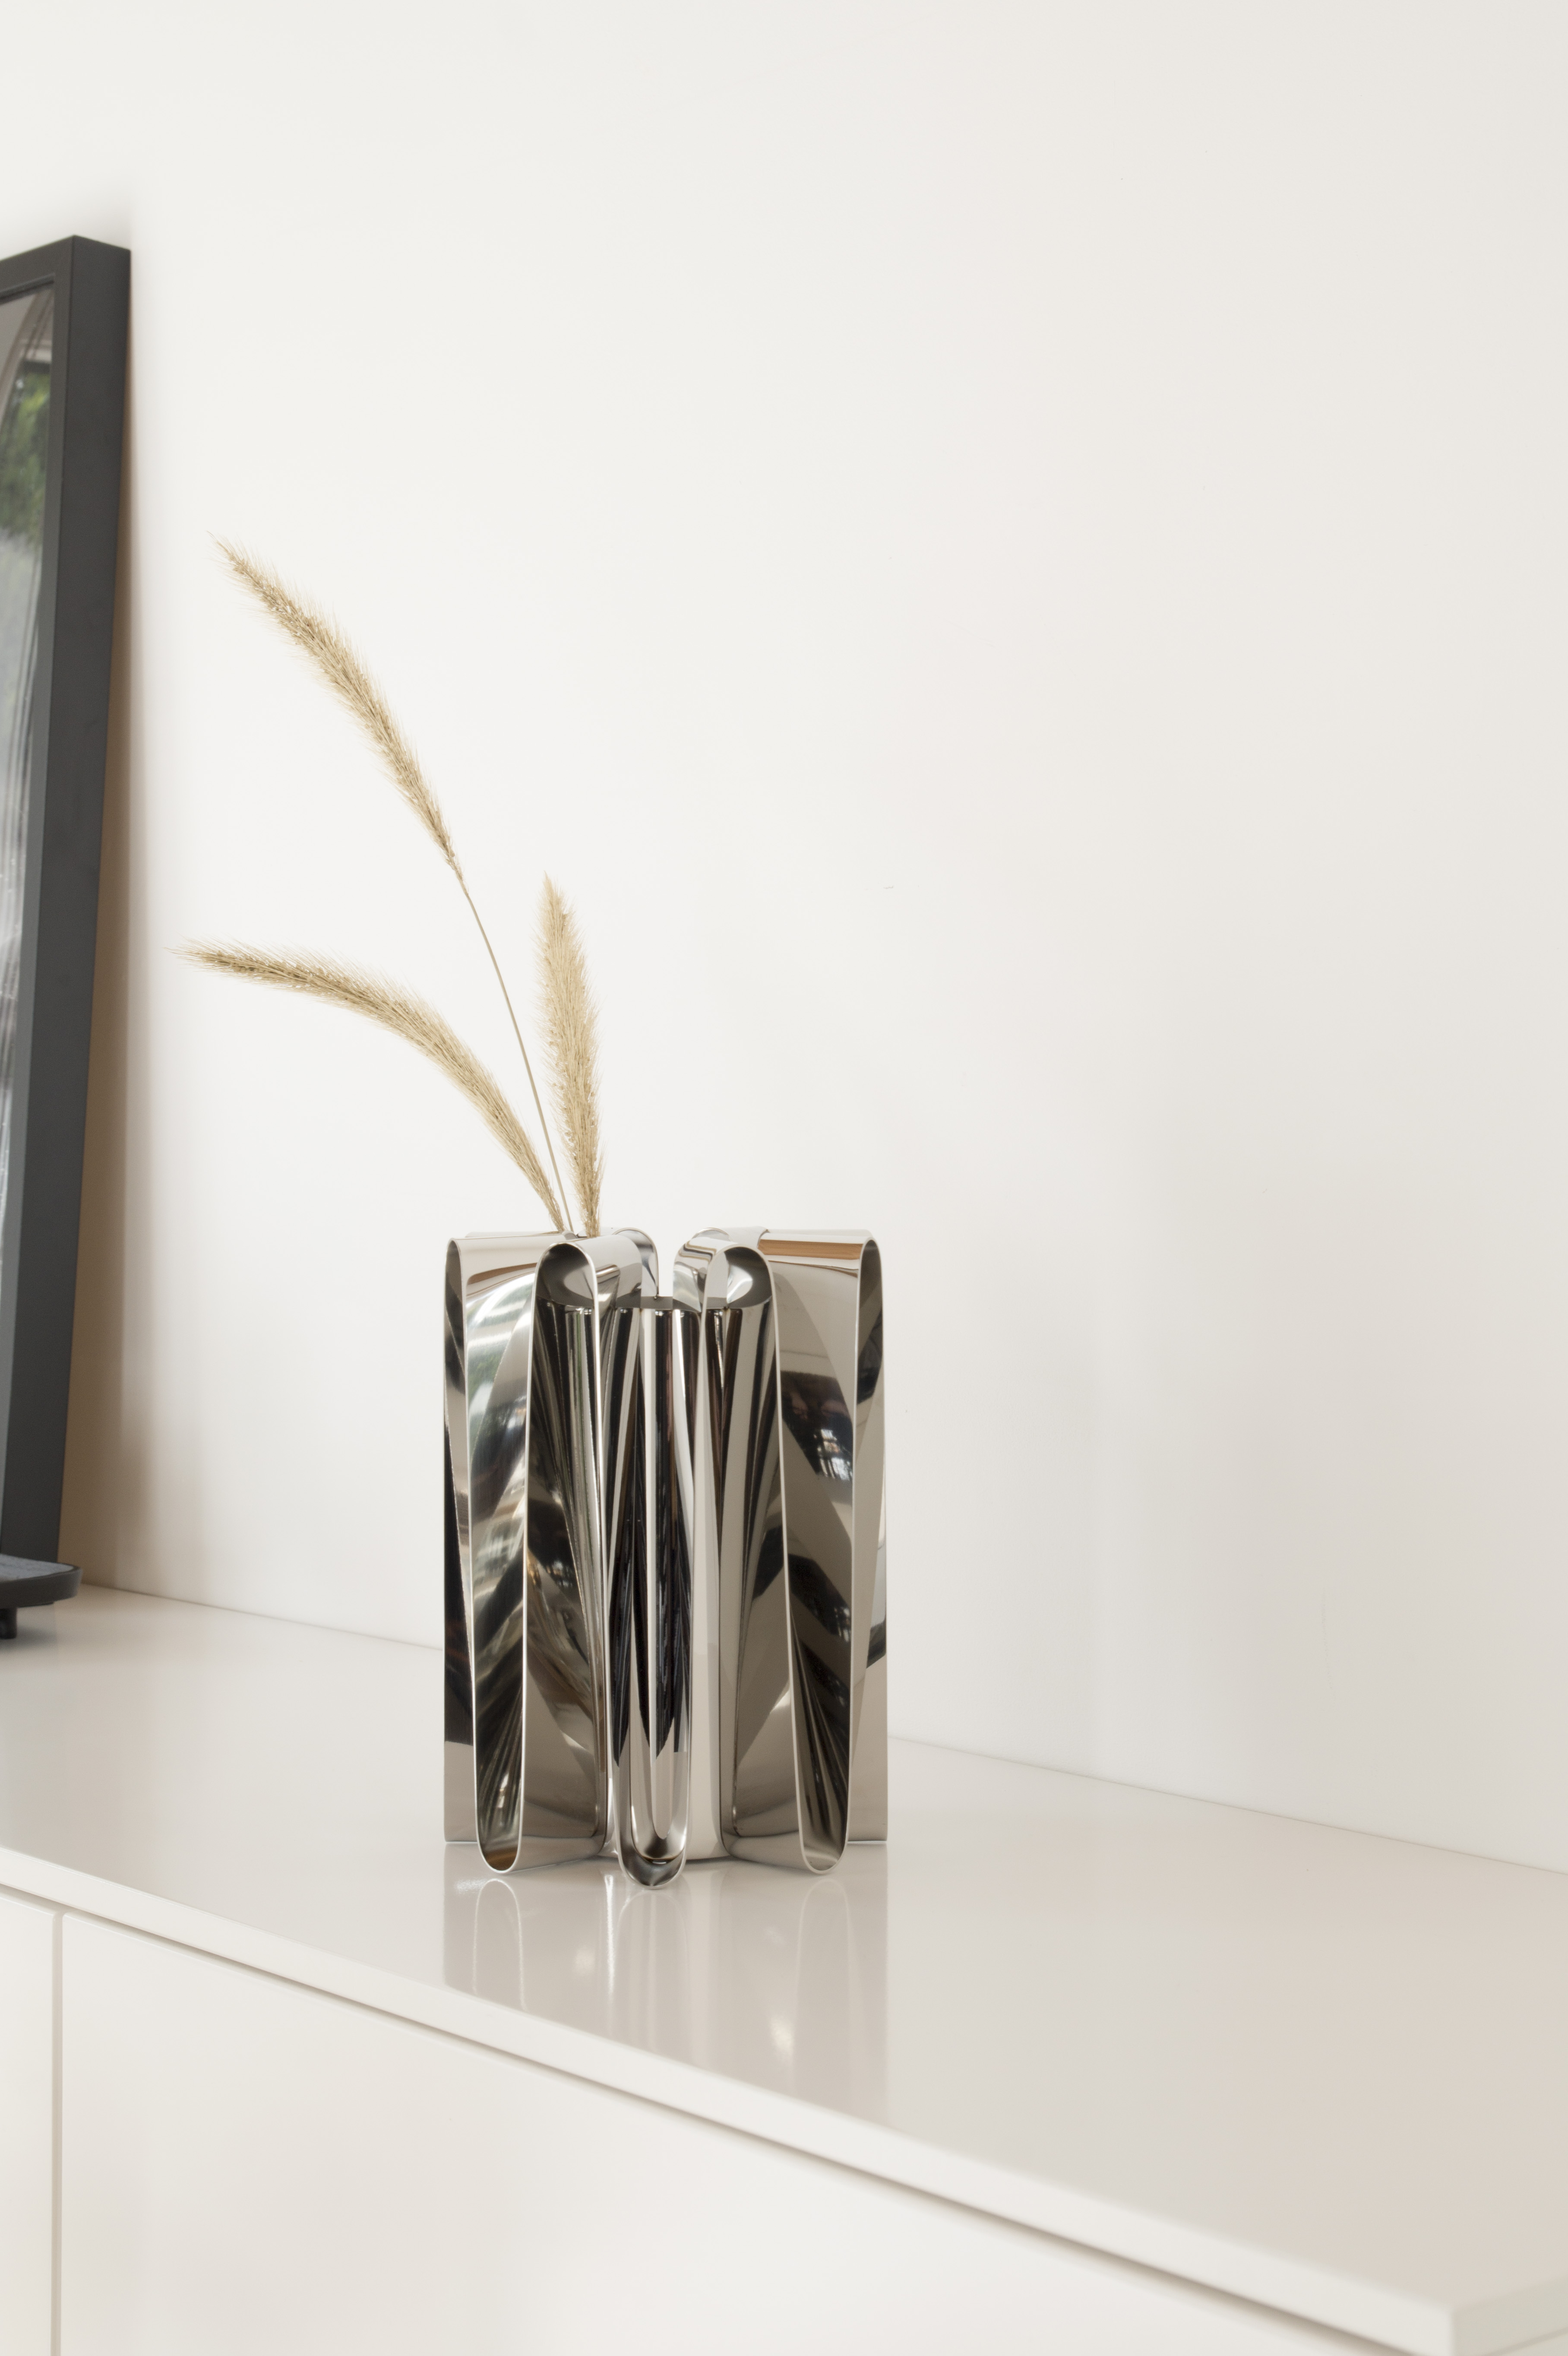 Frequency new collection by Kelly Wearstler for Georg Jensen